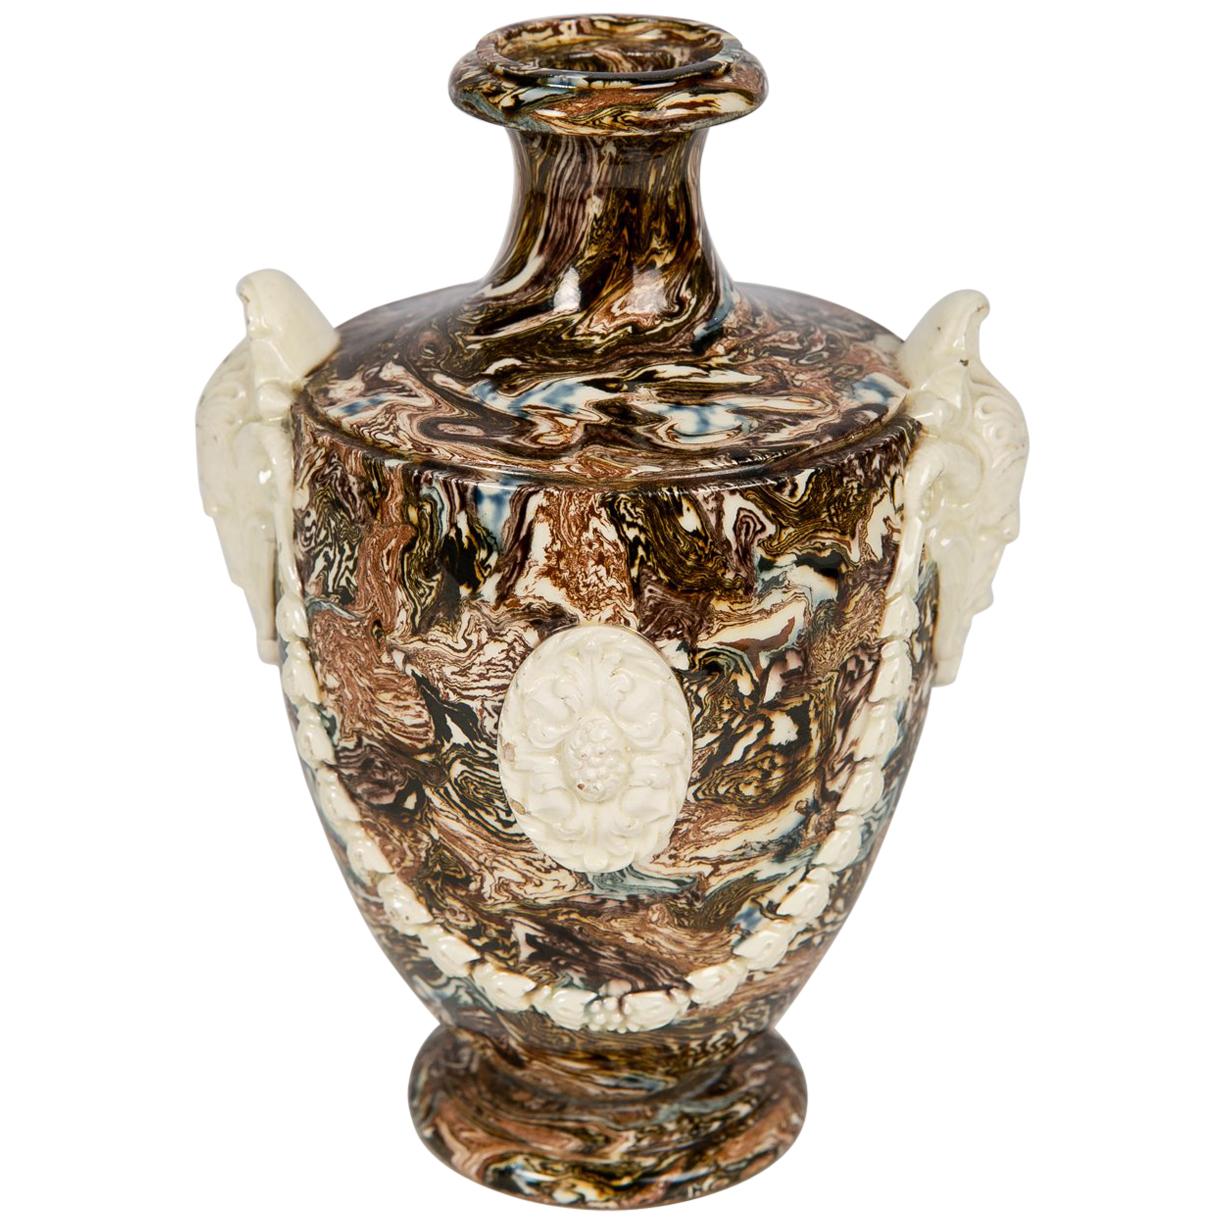 Solid Agateware Vase 18th Century Made by Neale & Co.